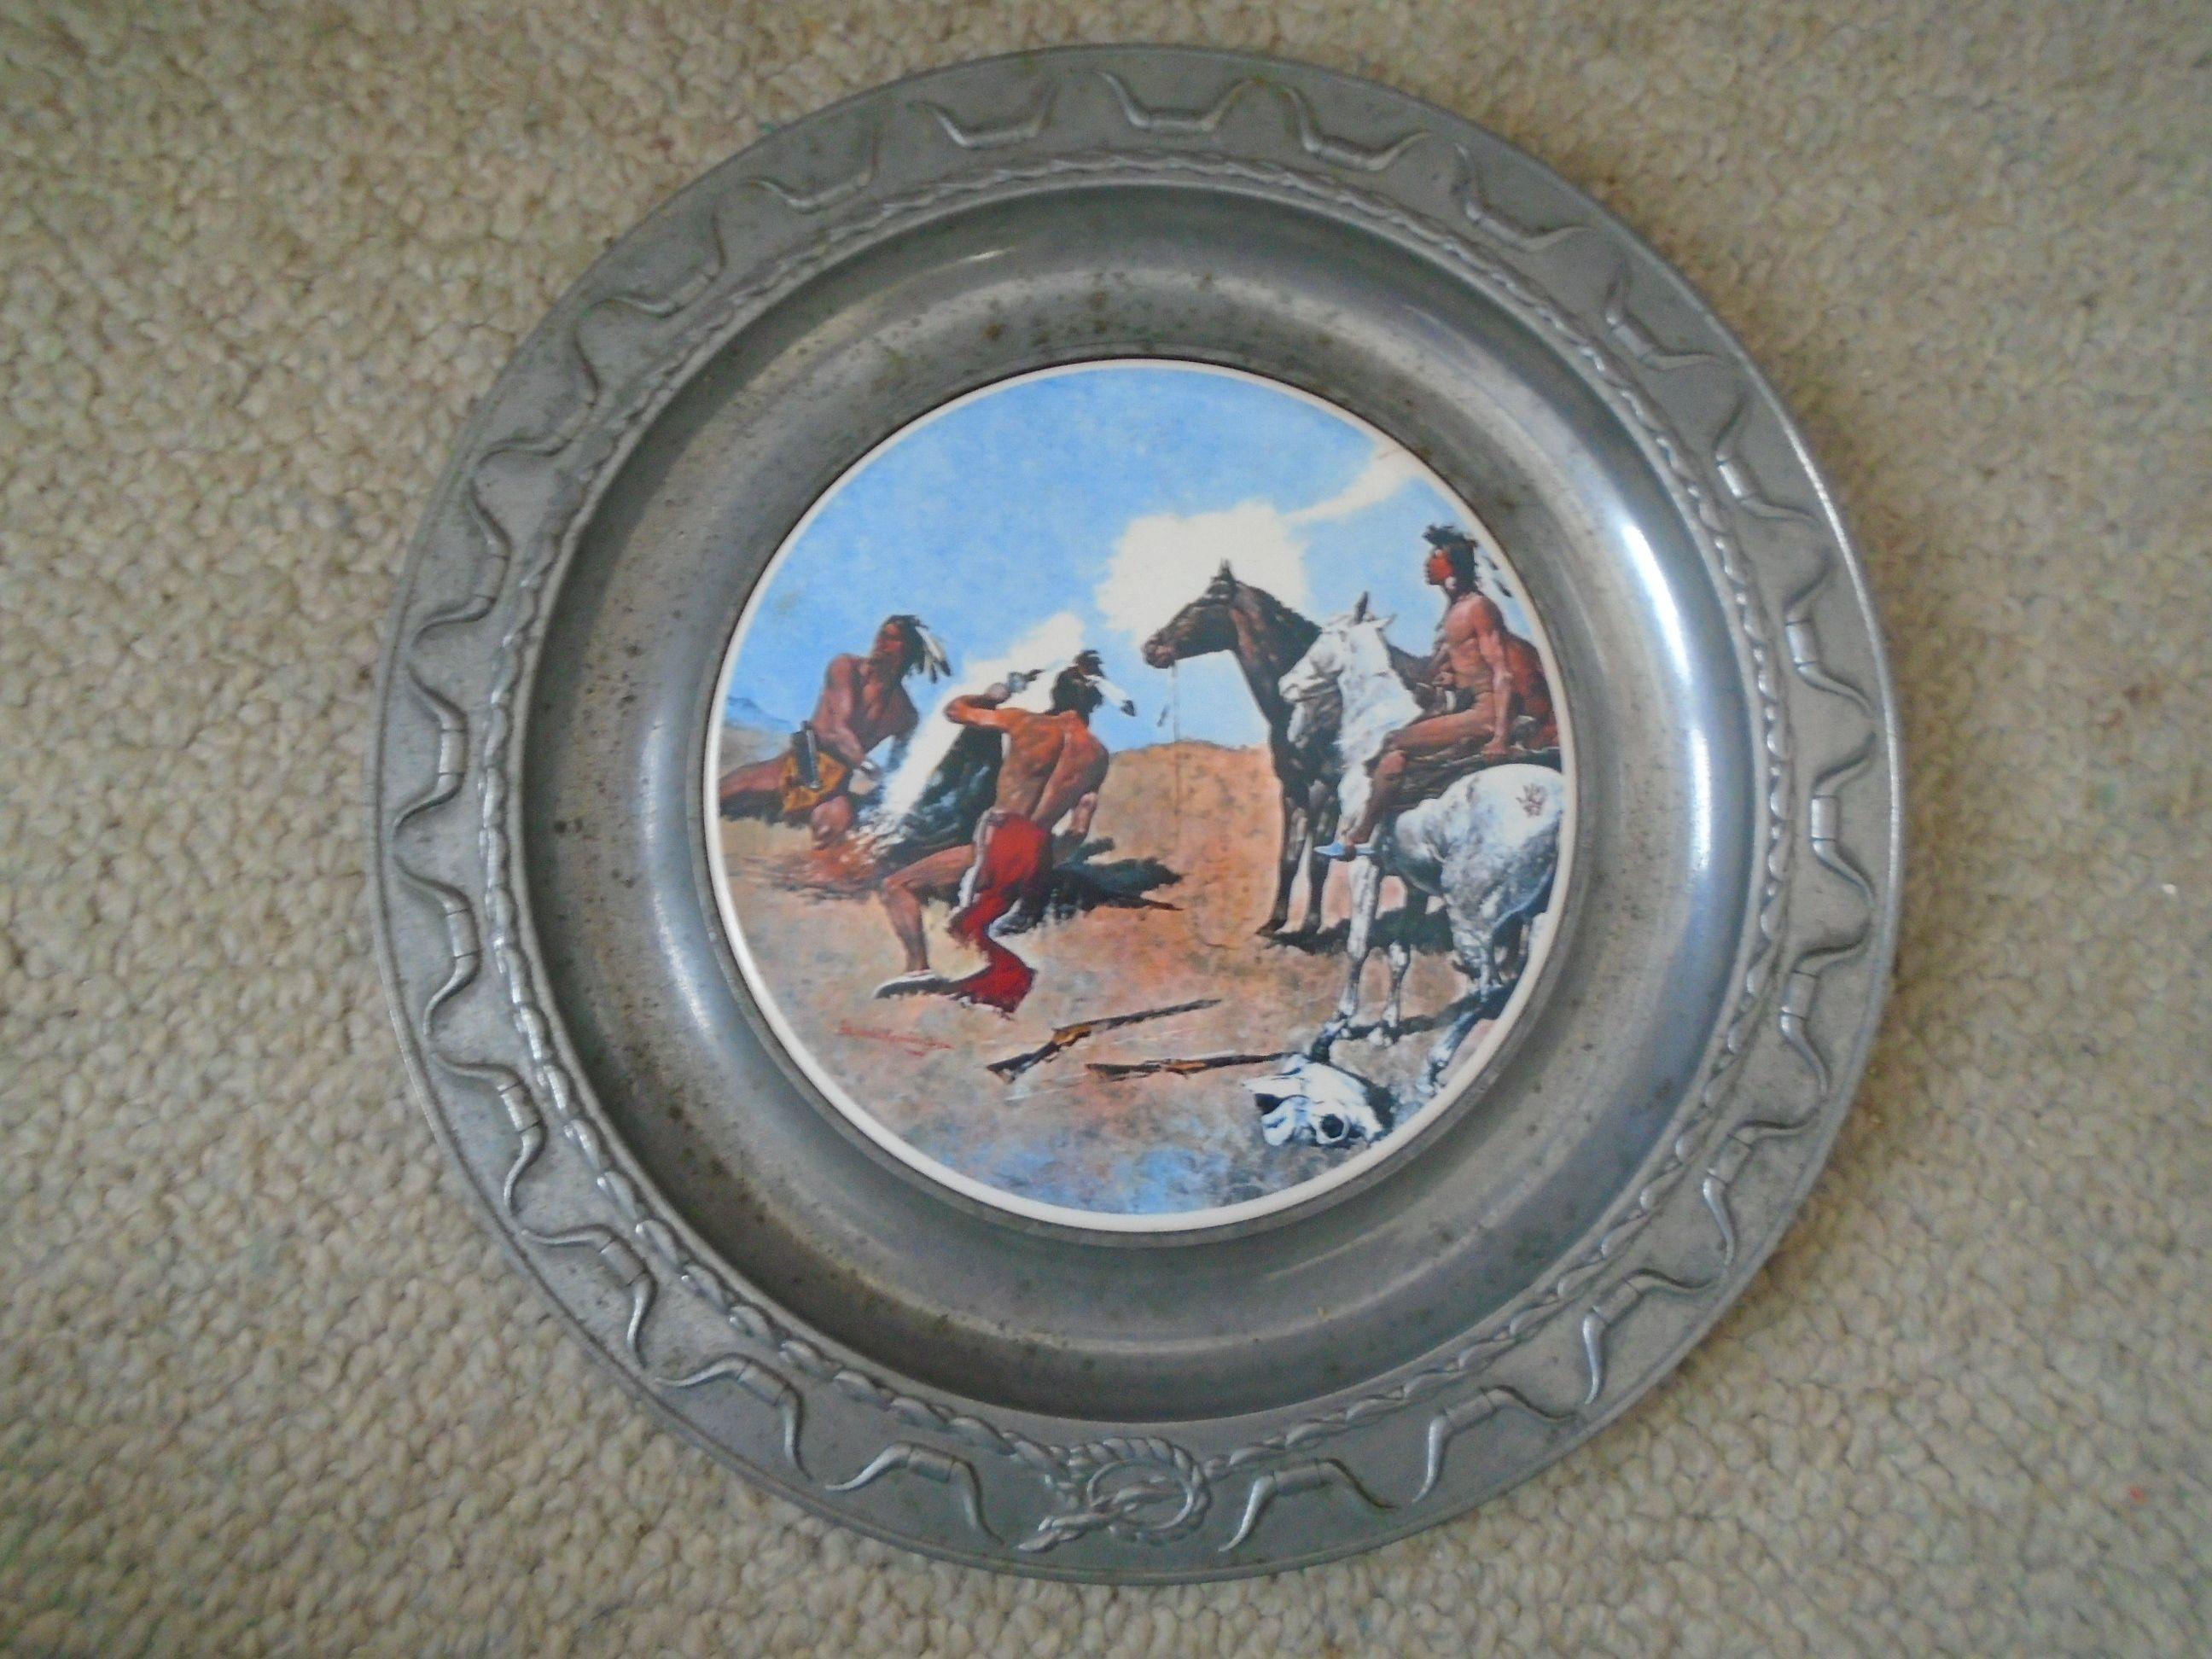 Set of 3 The Pioneer Foundry Plates. Porcelain plates inset in Pewter frames.